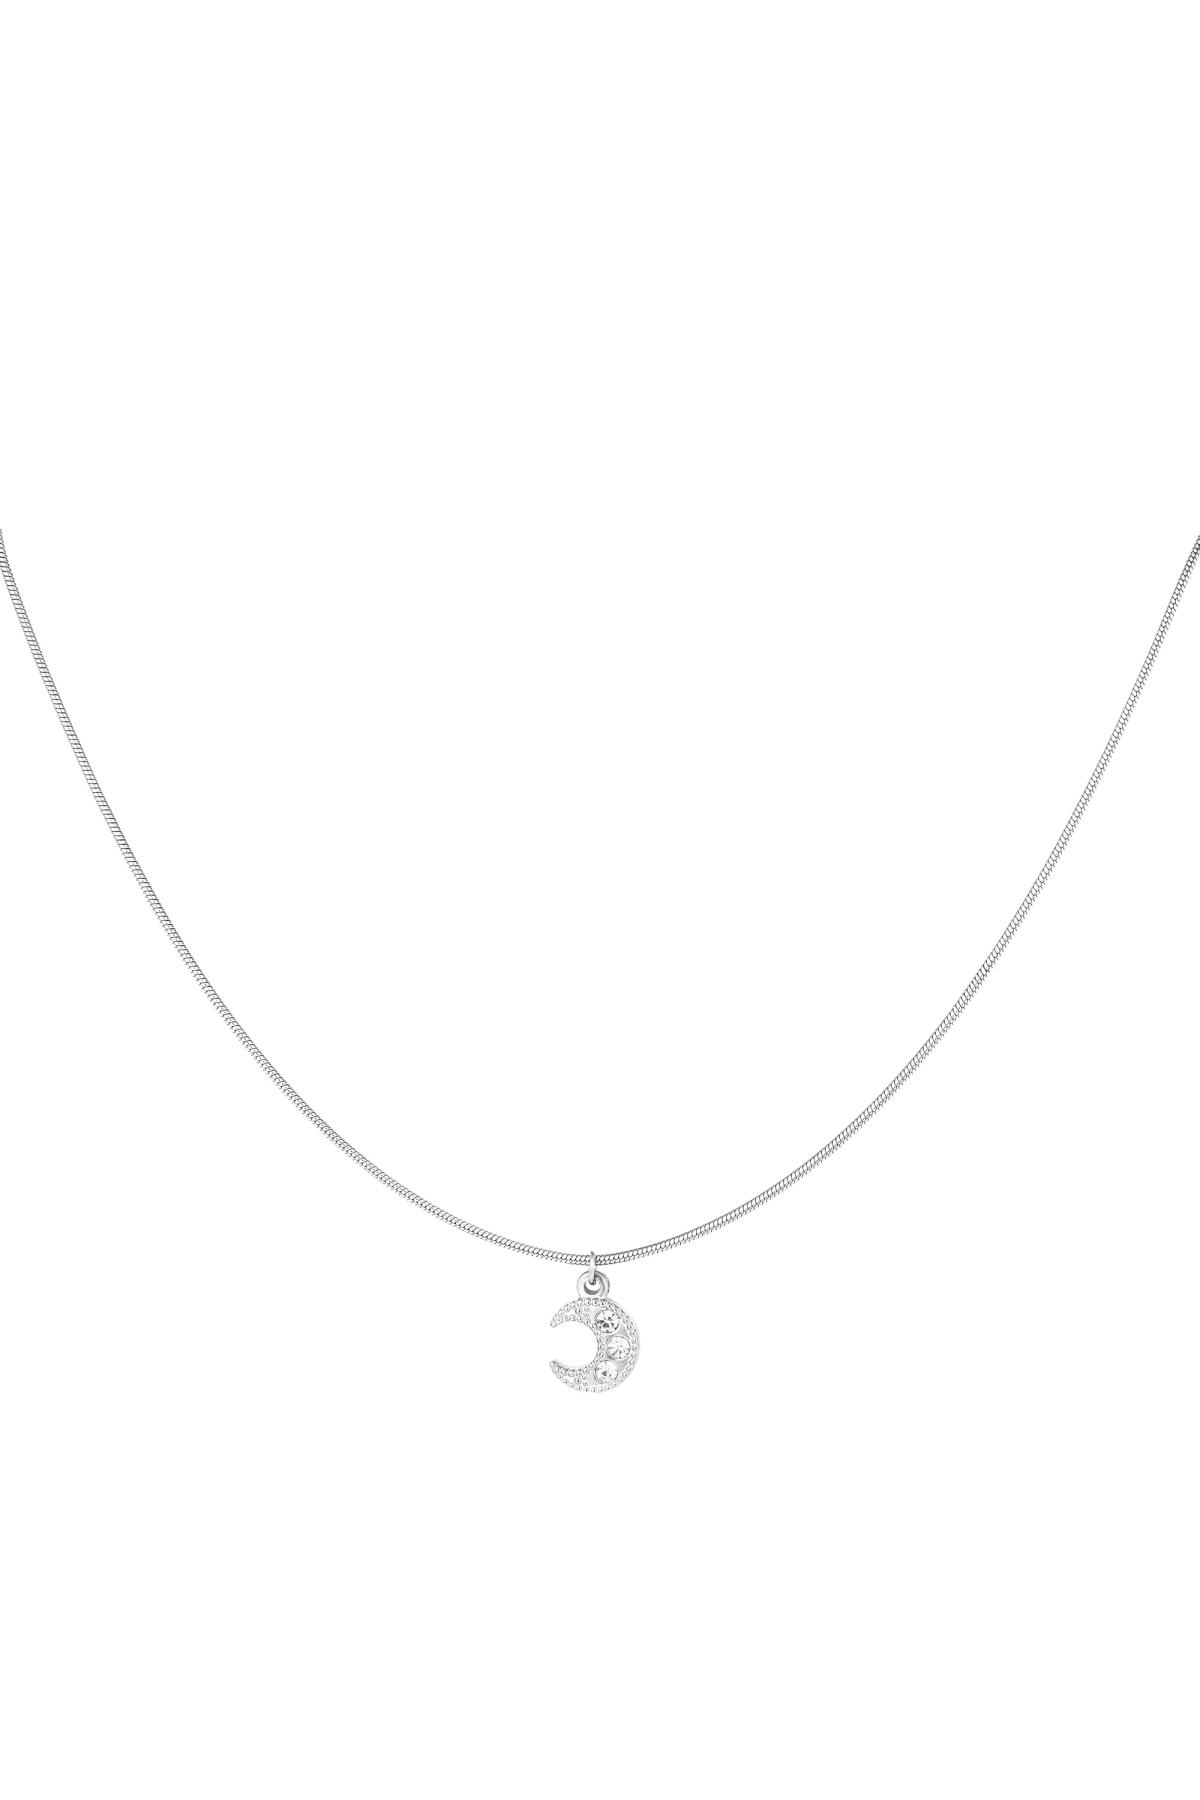 Necklace moon shine Silver Stainless Steel